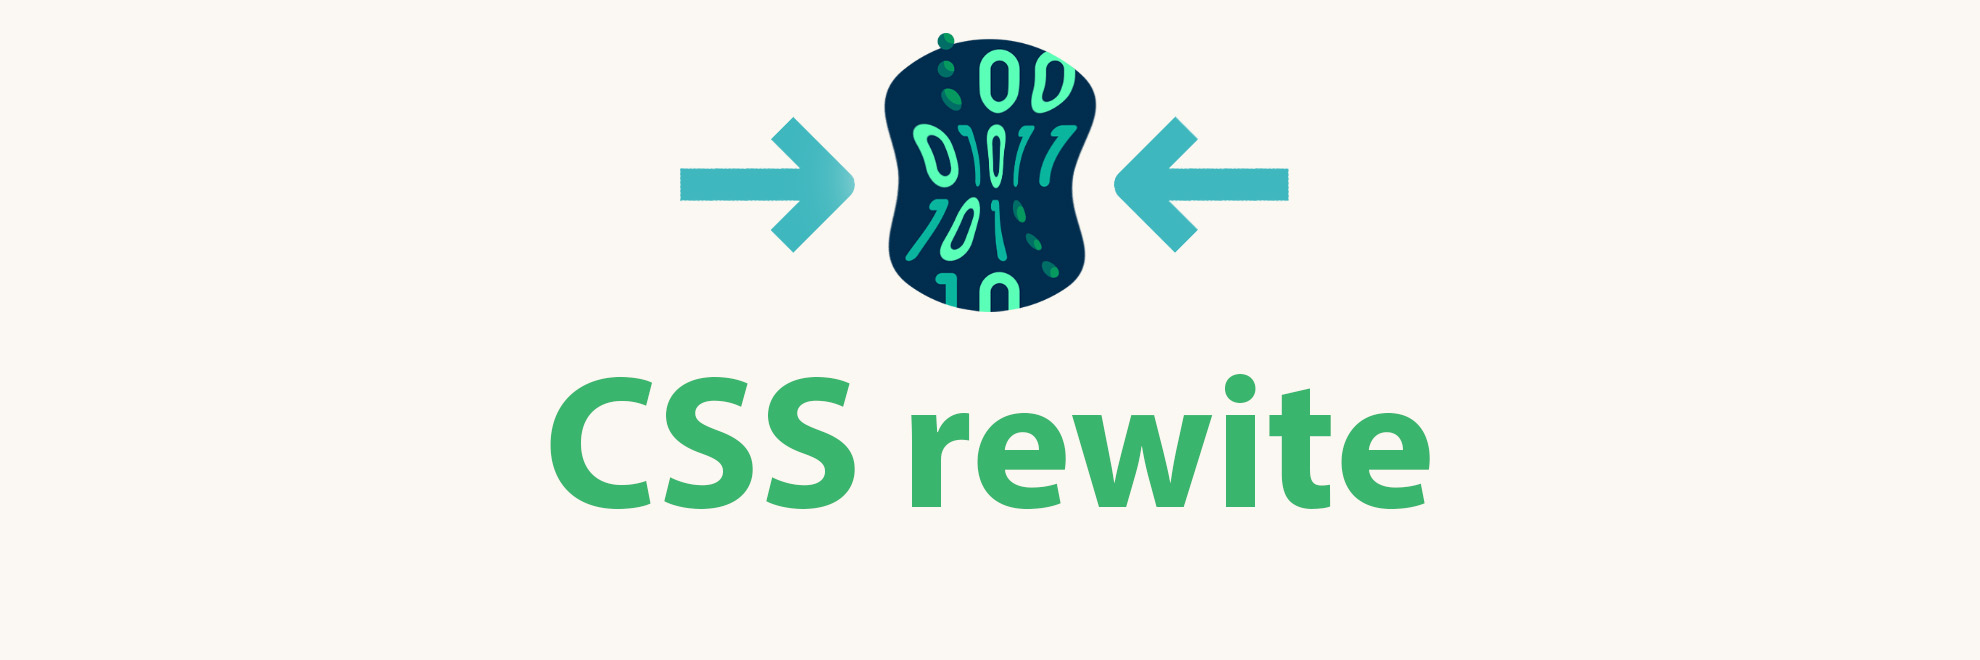 Illustration showing text CSS rewrite and small graphics showing the squeezed binary code by two arrows.